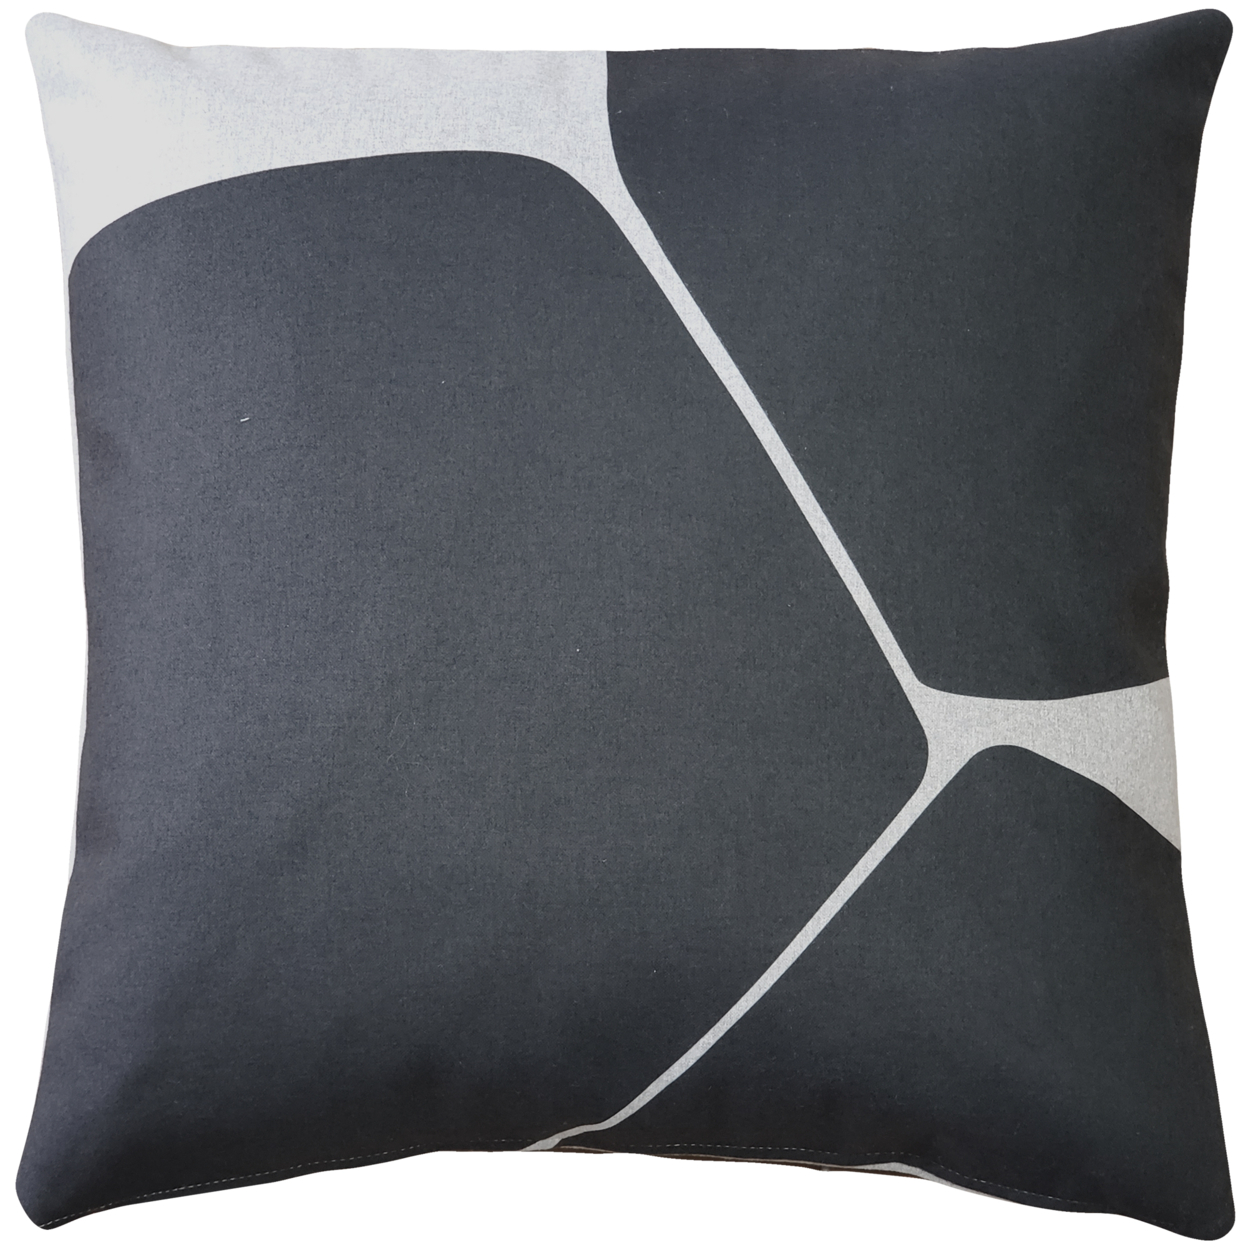 Aurora Charcoal Black Throw Pillow 19x19 Inches Square, Complete Pillow With Polyfill Pillow Insert